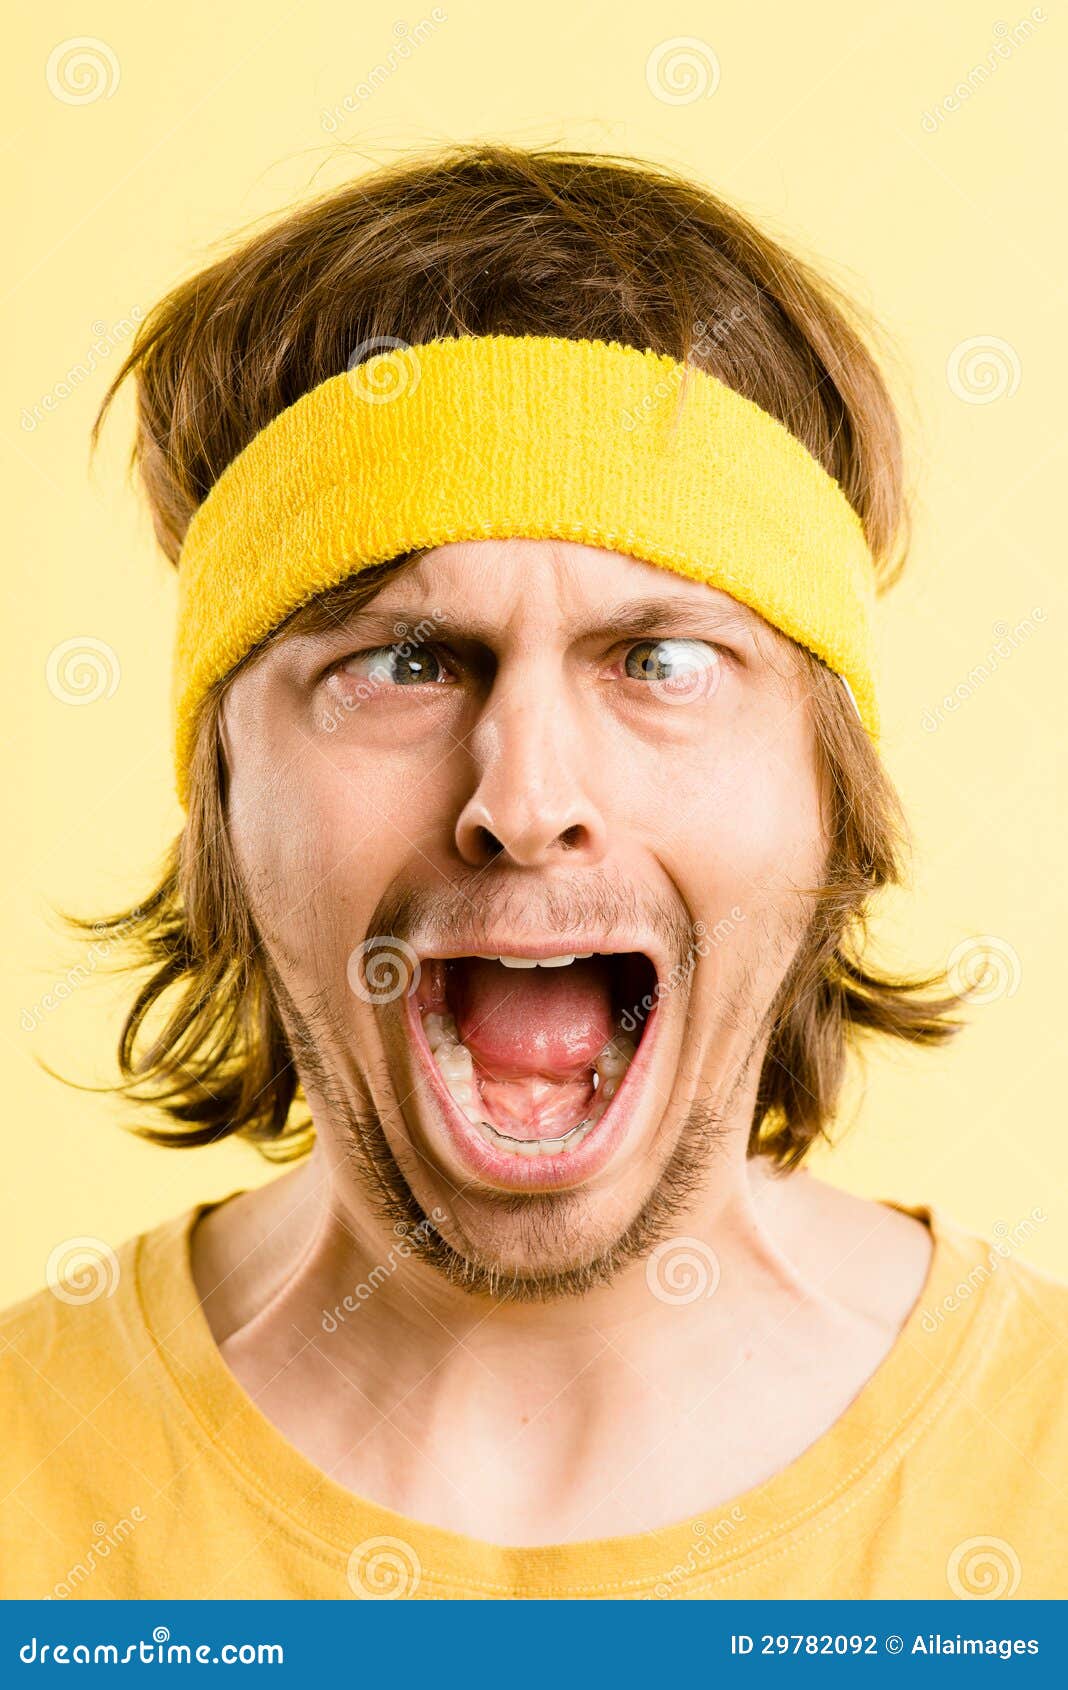 Funny Man Portrait Real People High Definition Yellow Background ...